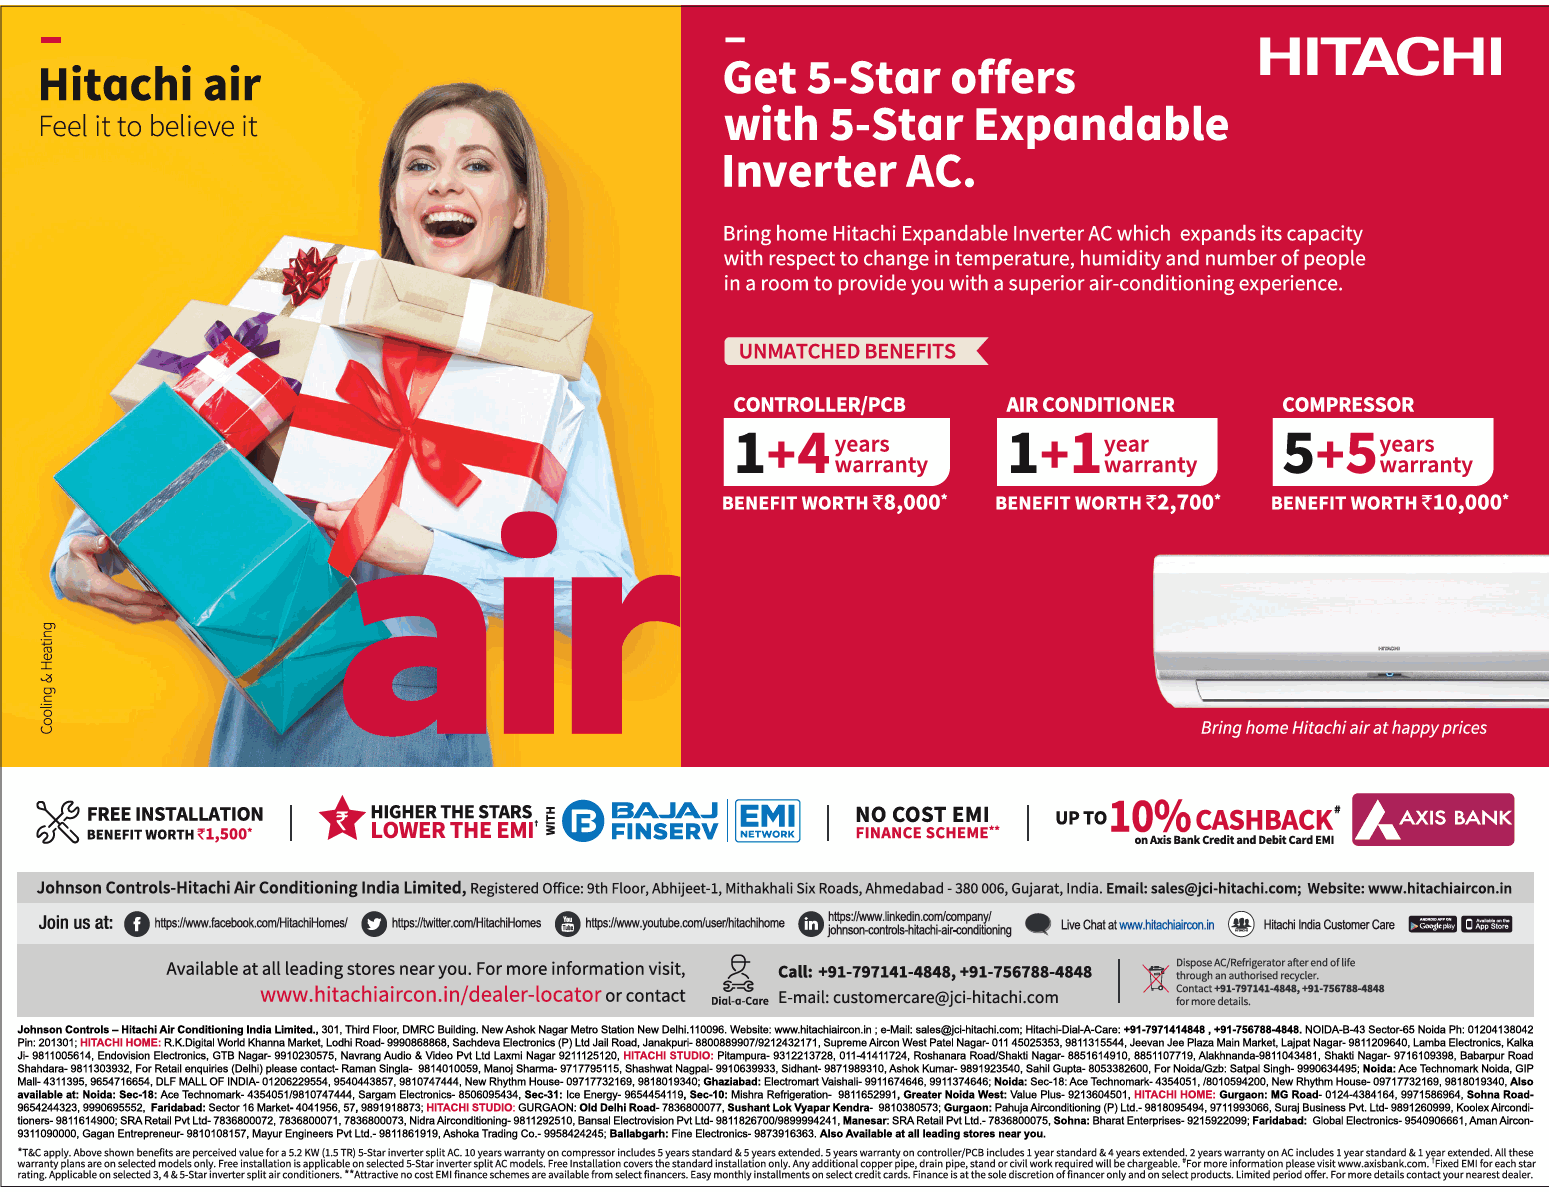 hitachi-air-conditioners-get-5-star-offers-with-5-star-expandable-inverter-ac-ad-delhi-times-20-04-2019.png